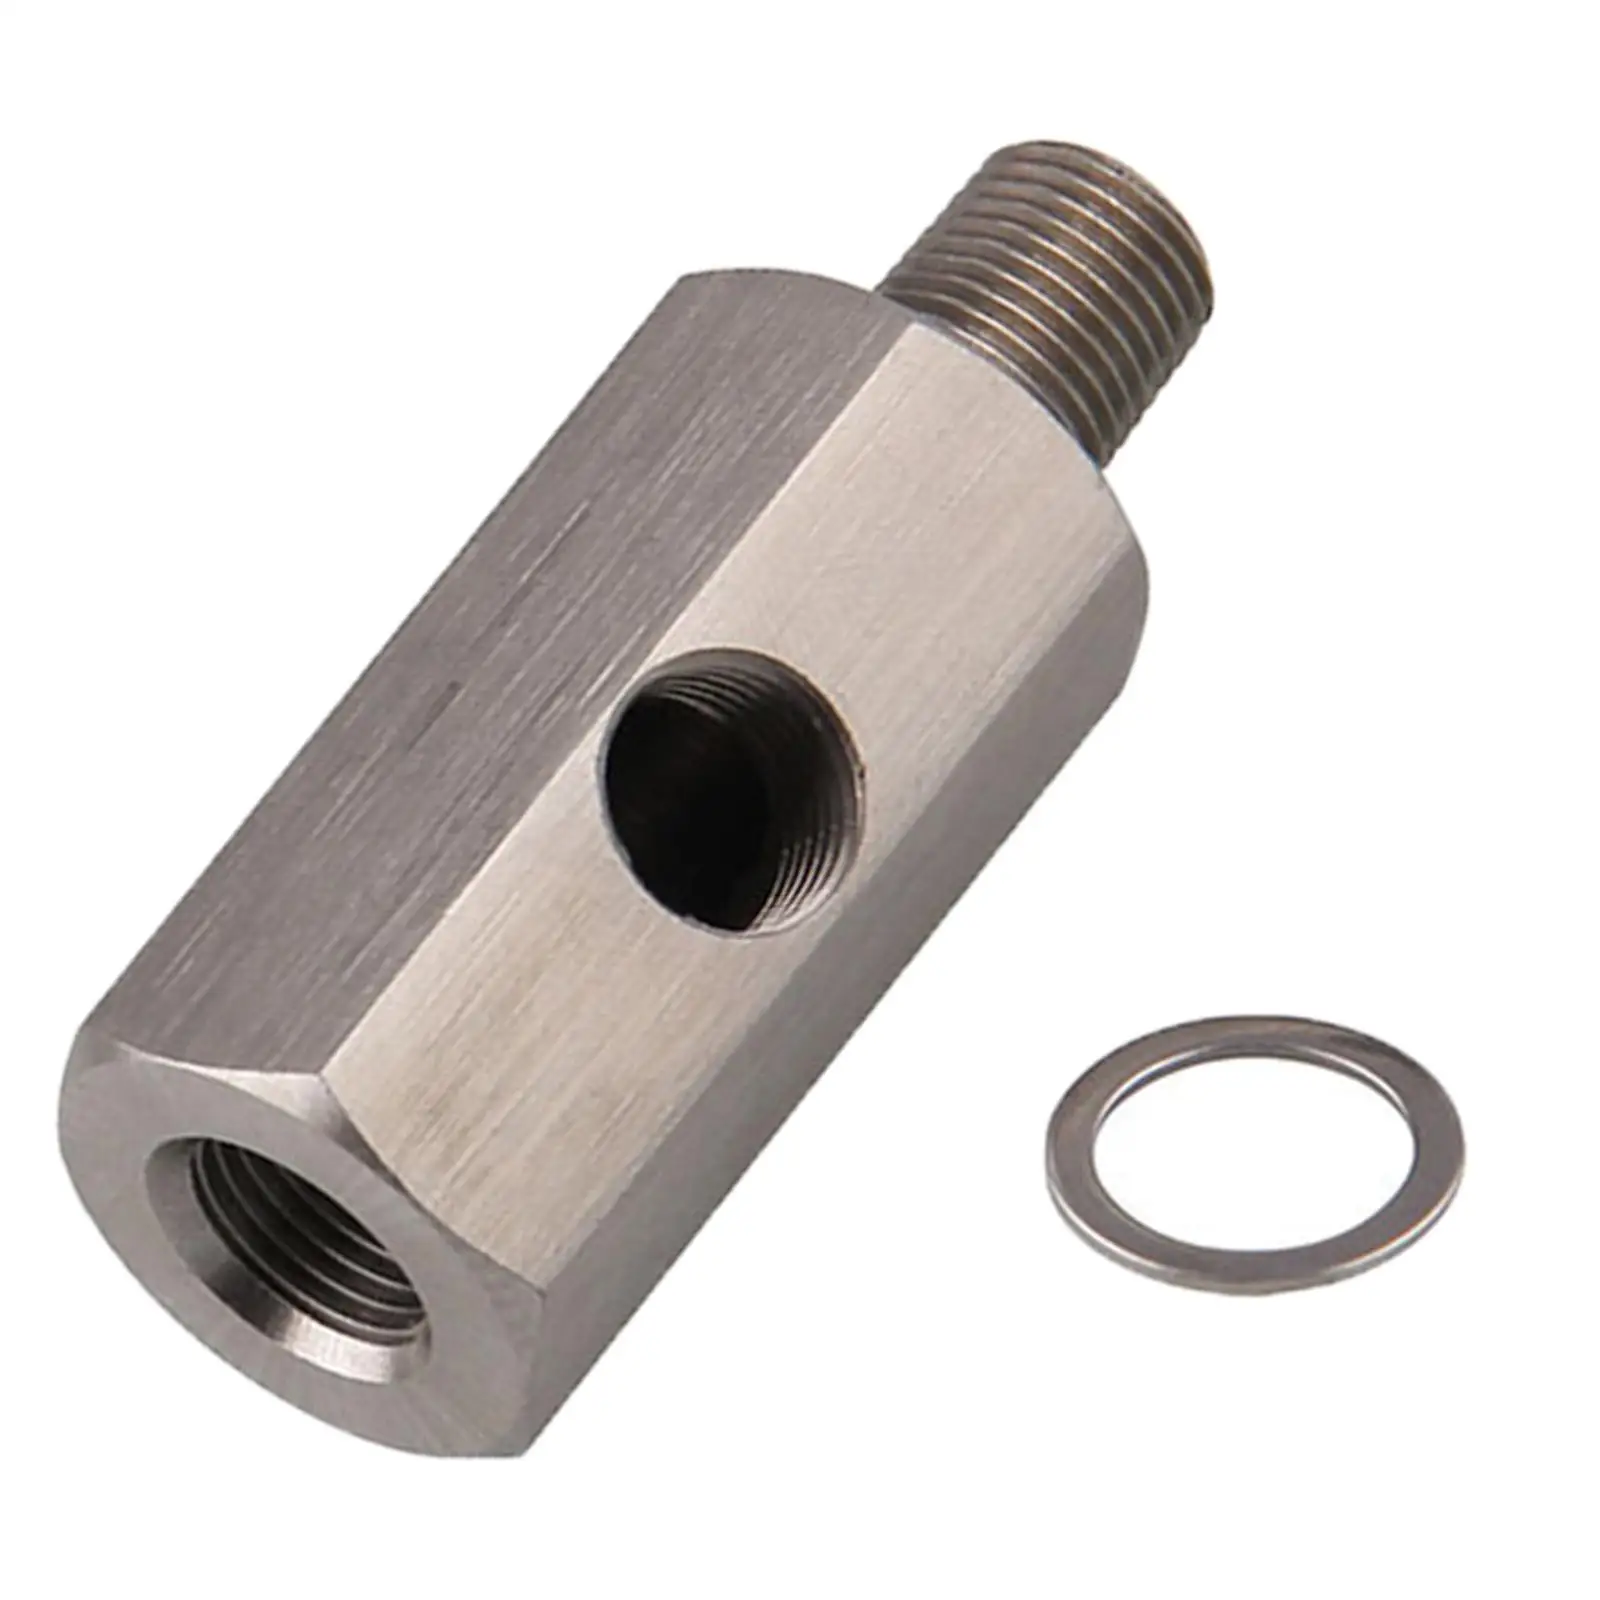 Automobile Oil Pressure Sensor Tee 1/8``Npt Adapter Turbo Supply Easy to Install Durable feed Line Gauge Accessories Replaces